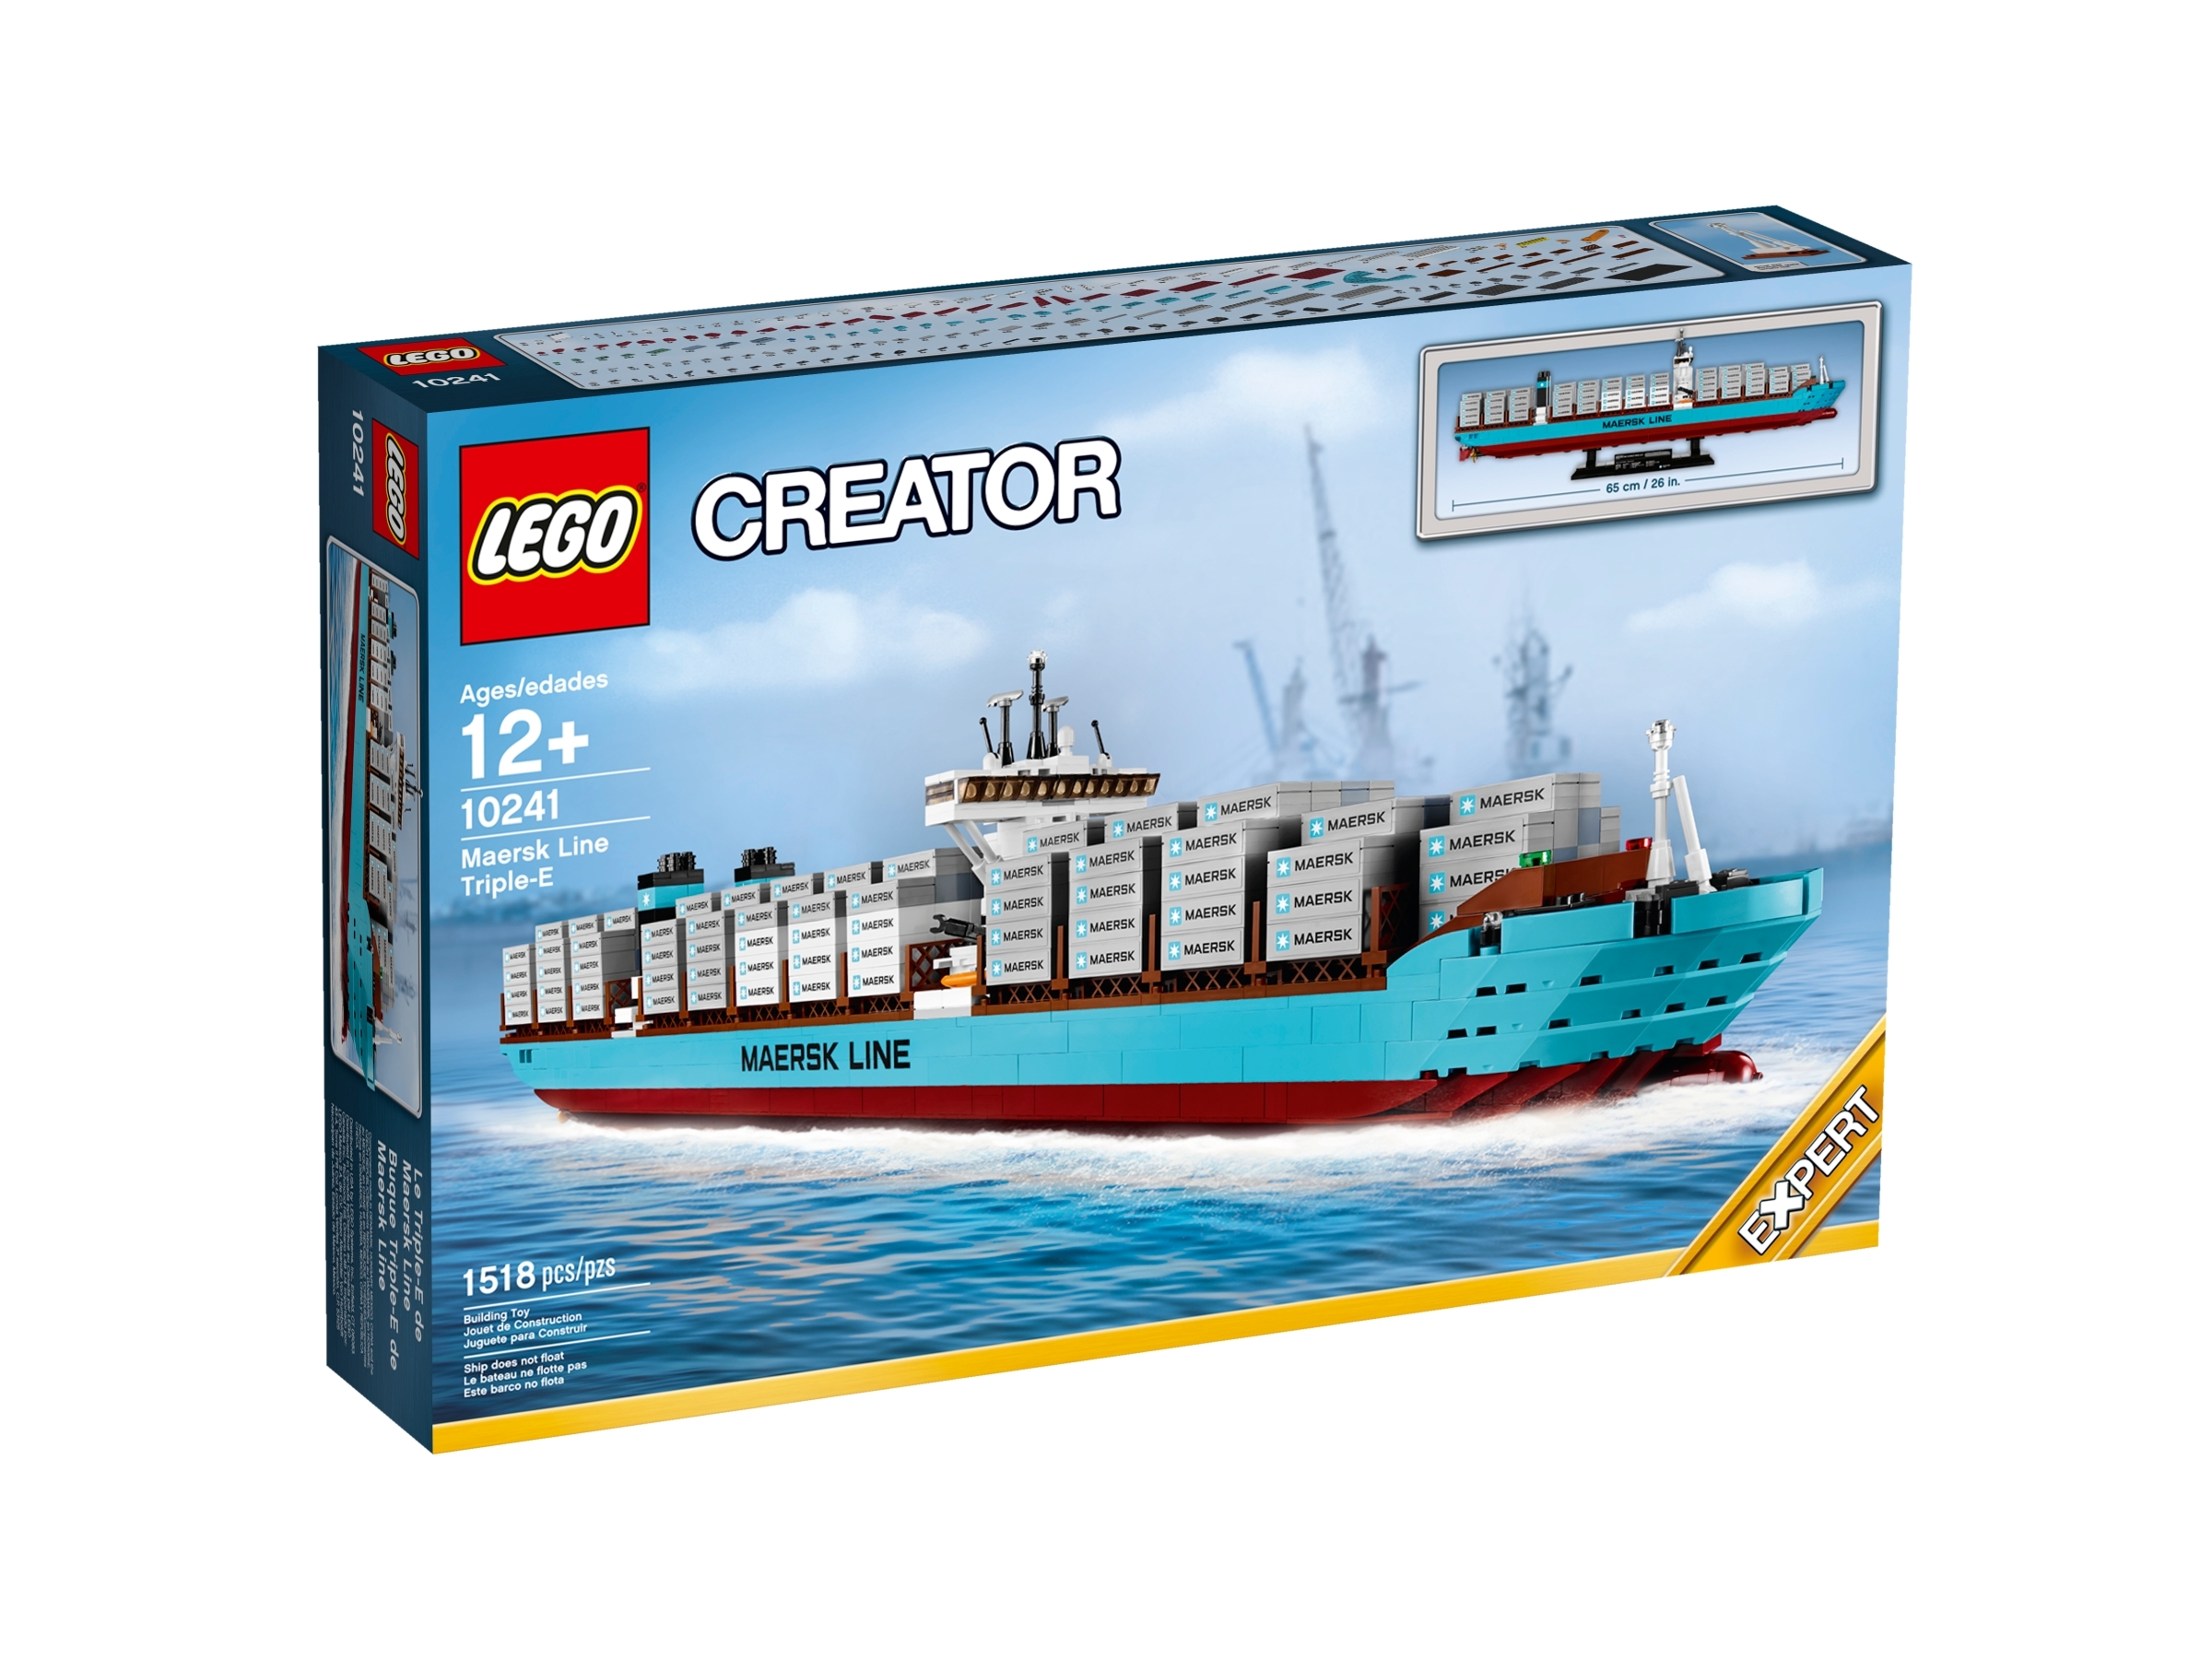 Maersk Line Triple-E 10241 Creator 3-in-1 | Buy online at Official LEGO® Shop US